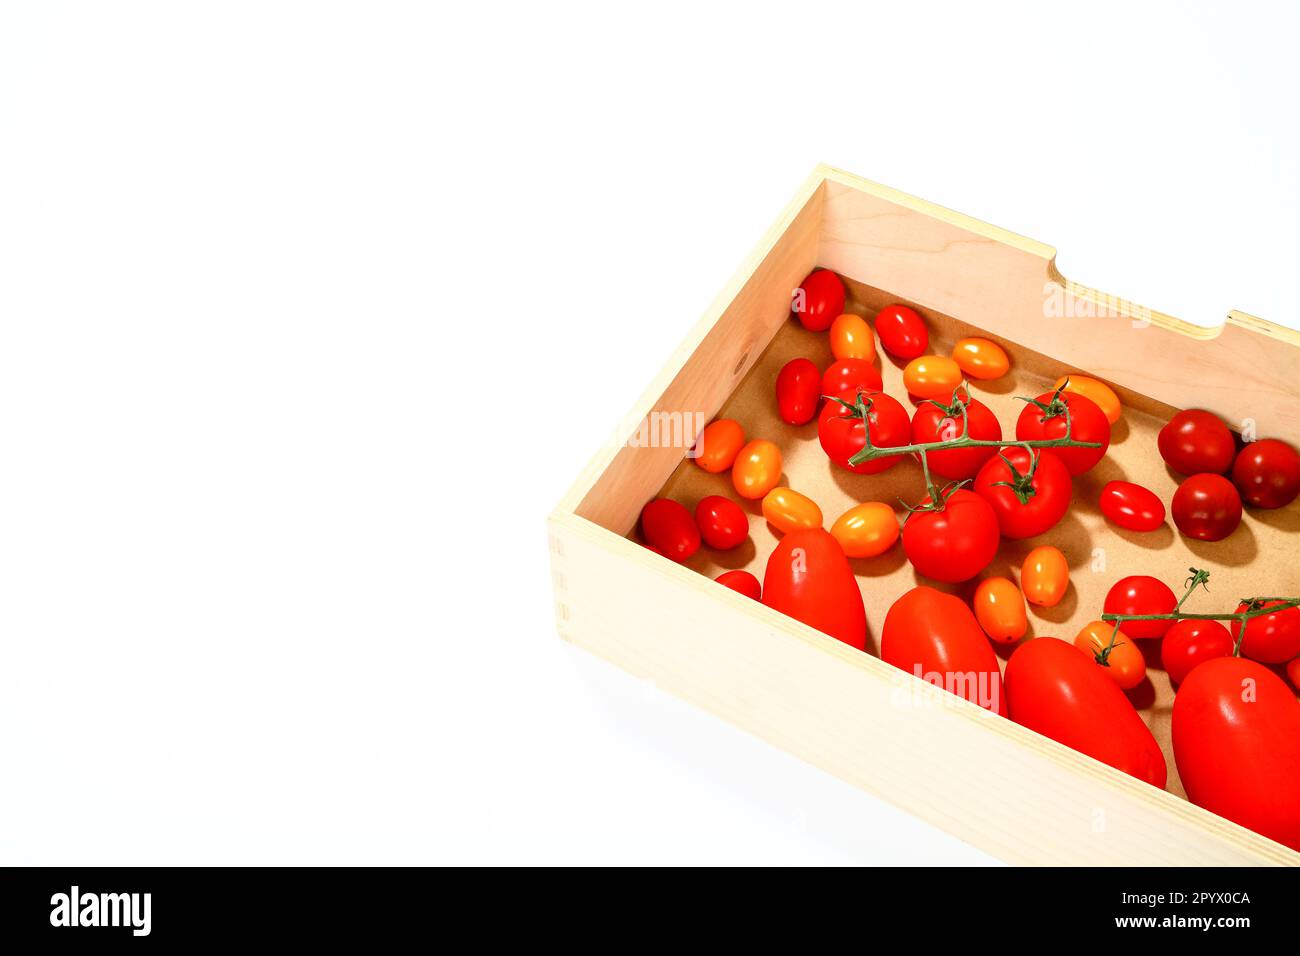 Plum vine and cherry tomatoes in a wooden box isolated on a white background with copy space Stock Photo